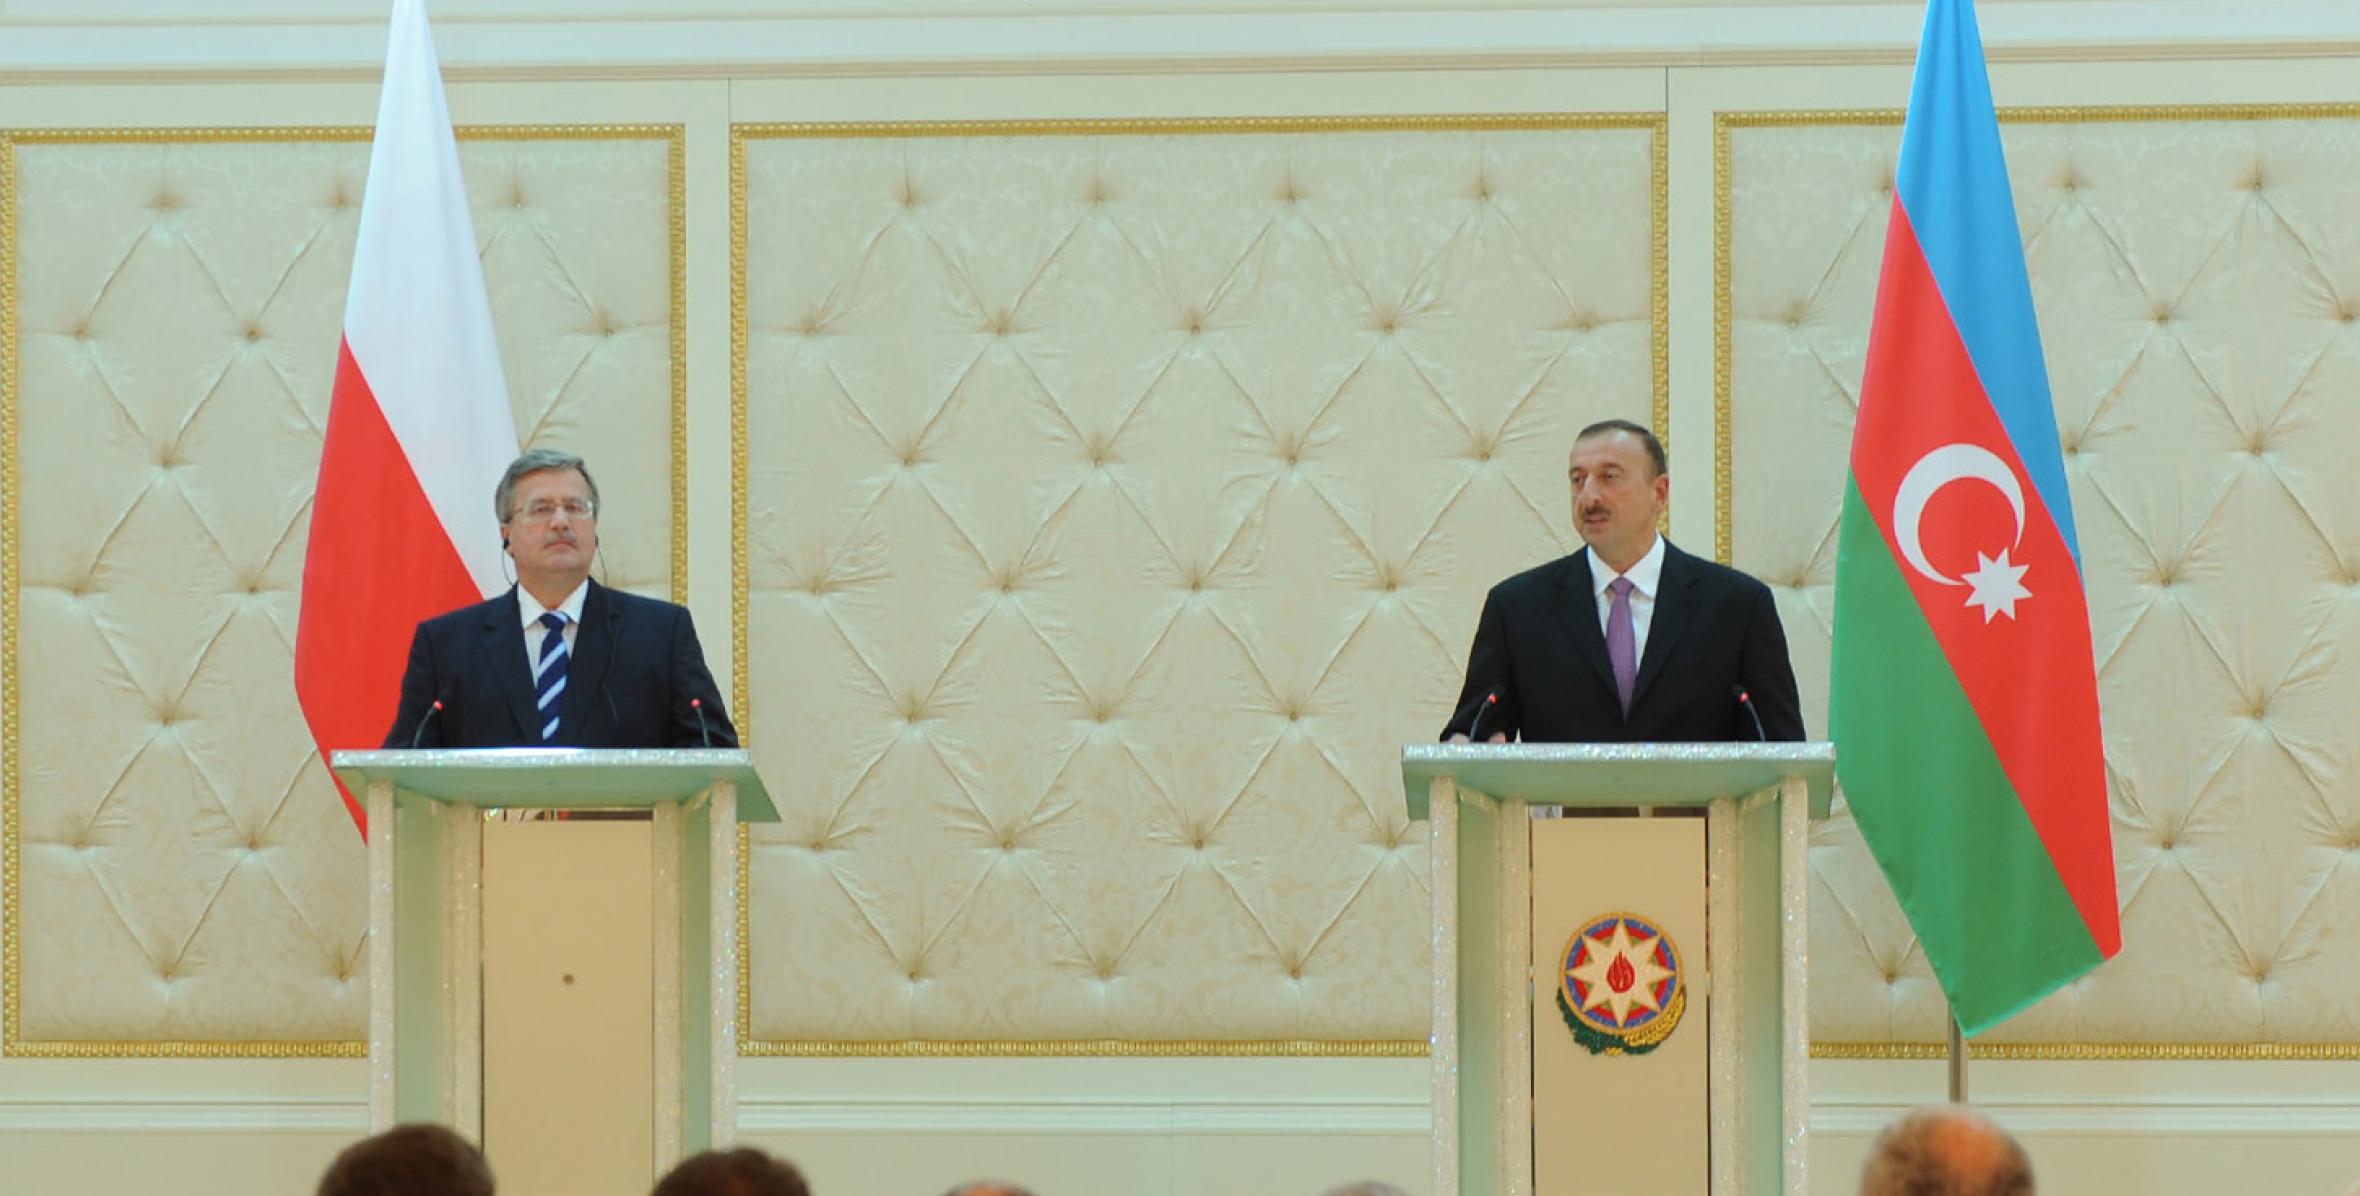 Presidents of Azerbaijan and Poland held a joint press conference